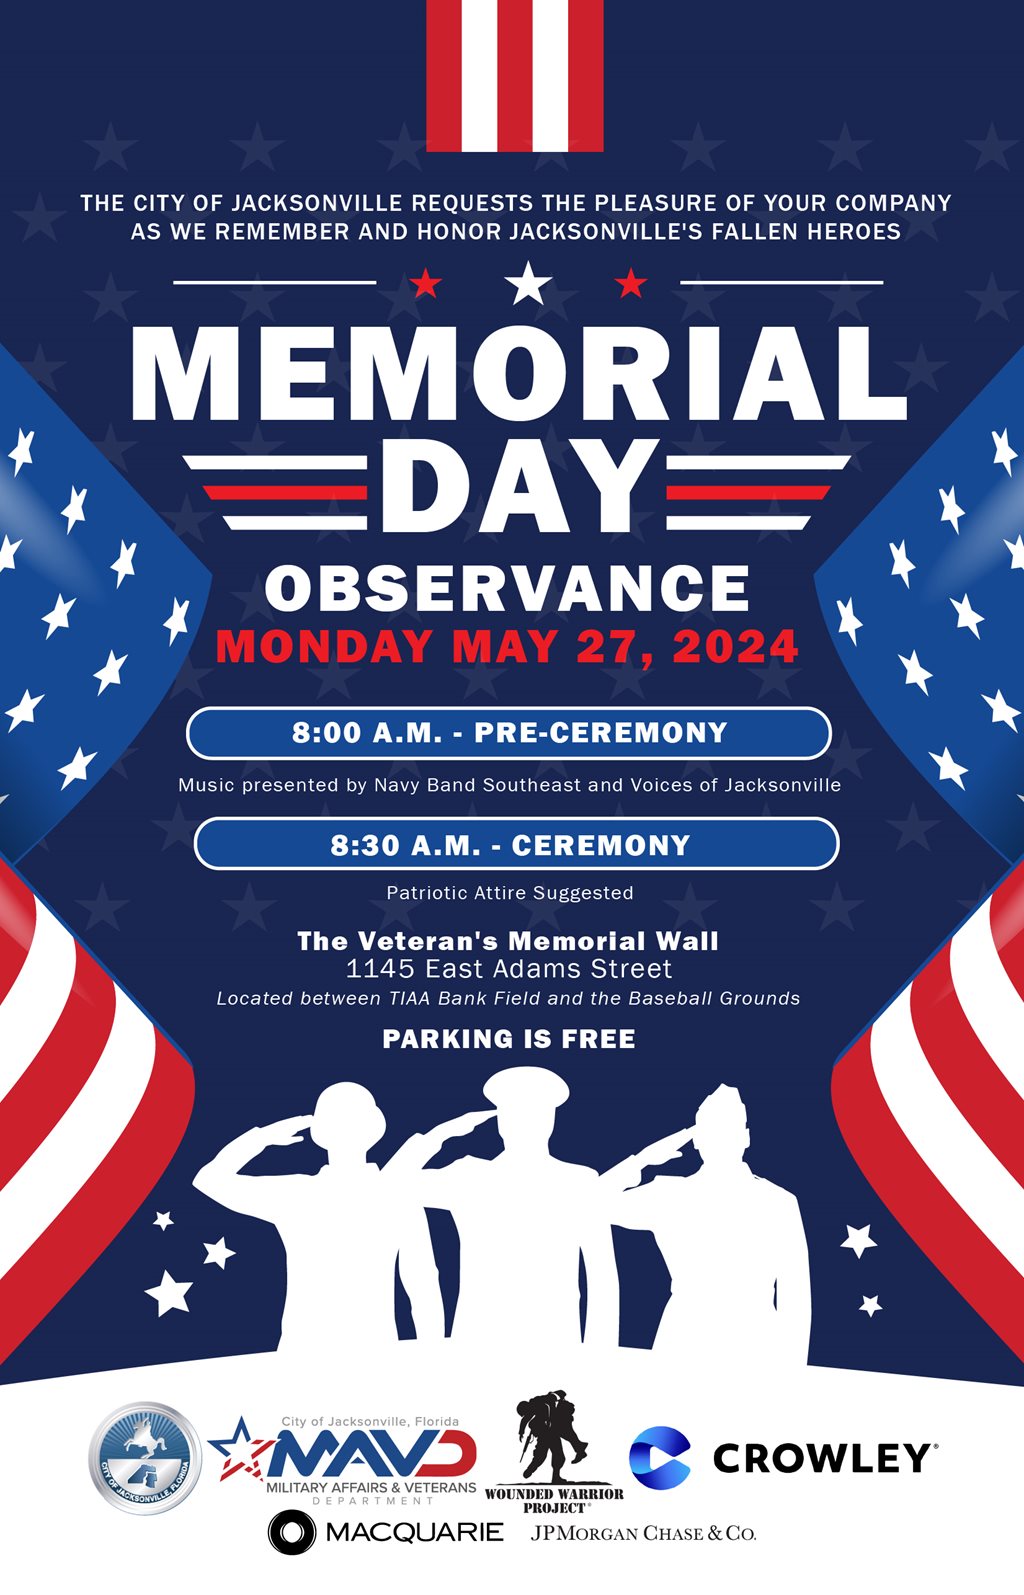 Memorial Day invite with event details and sponsor logos